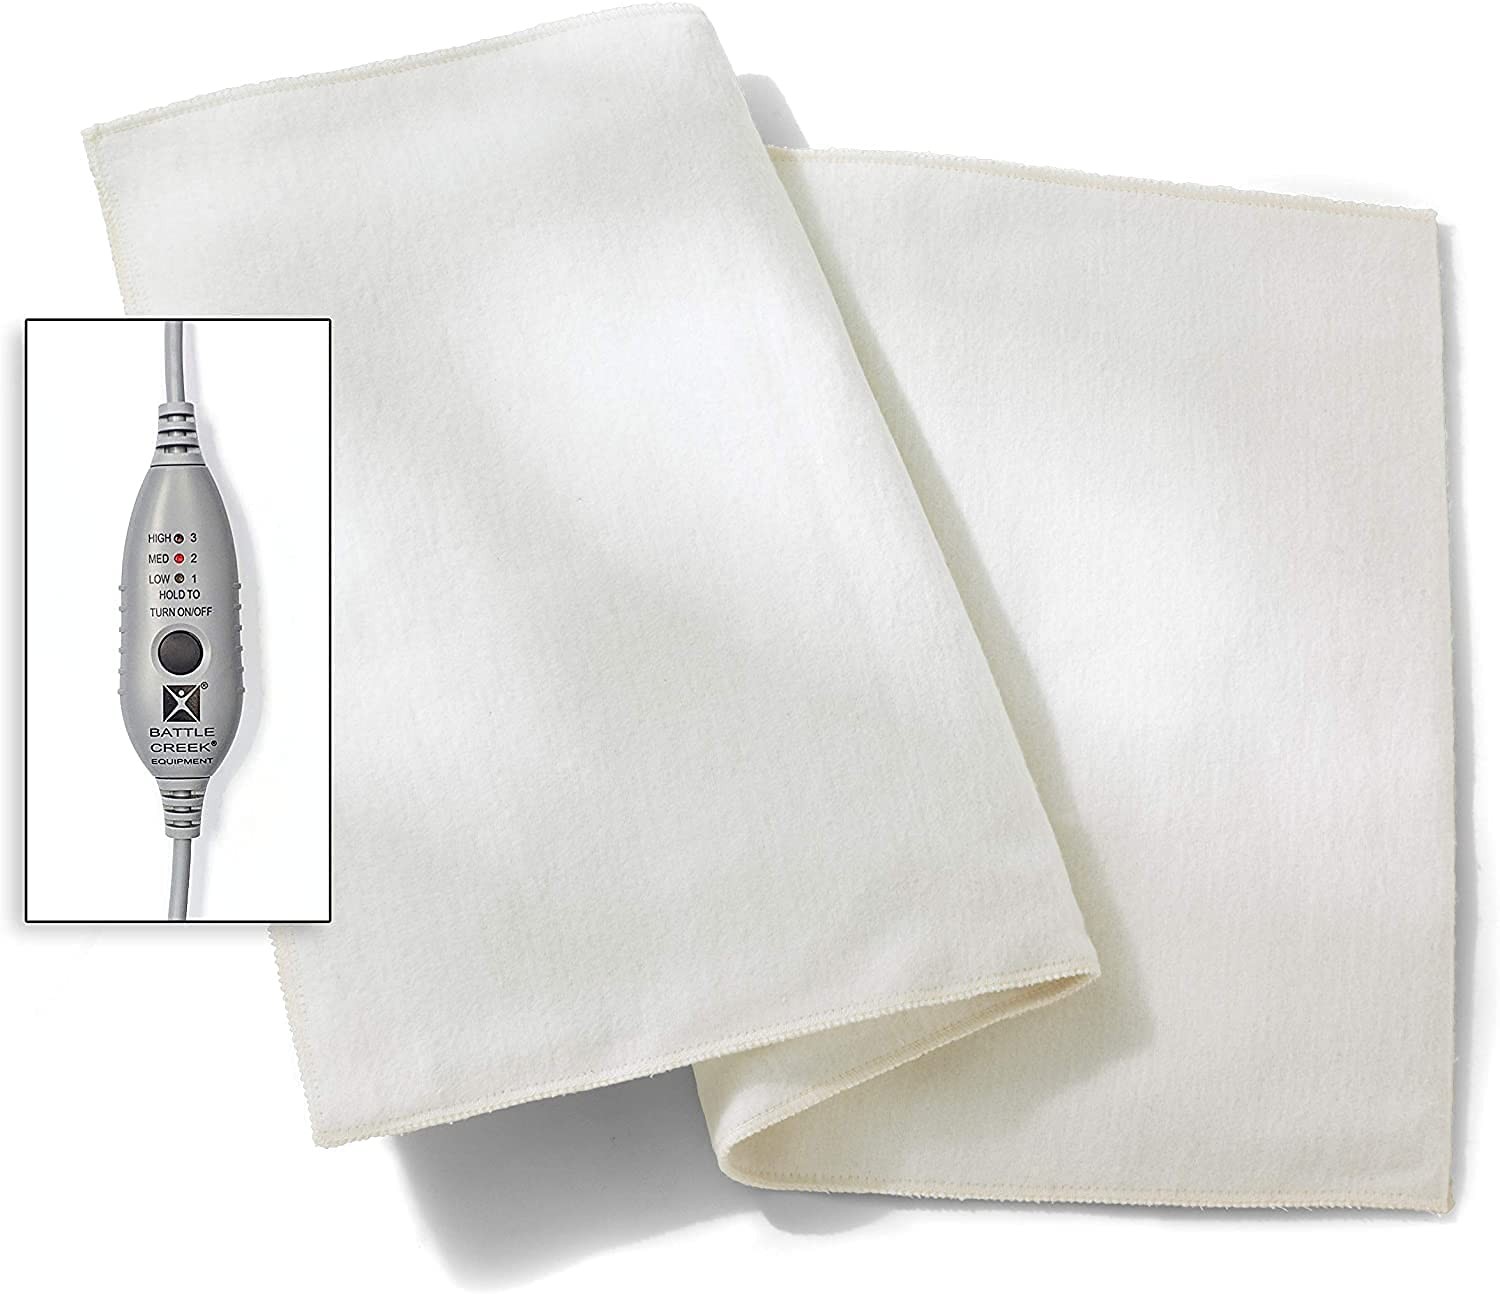 Thermophore heating pad